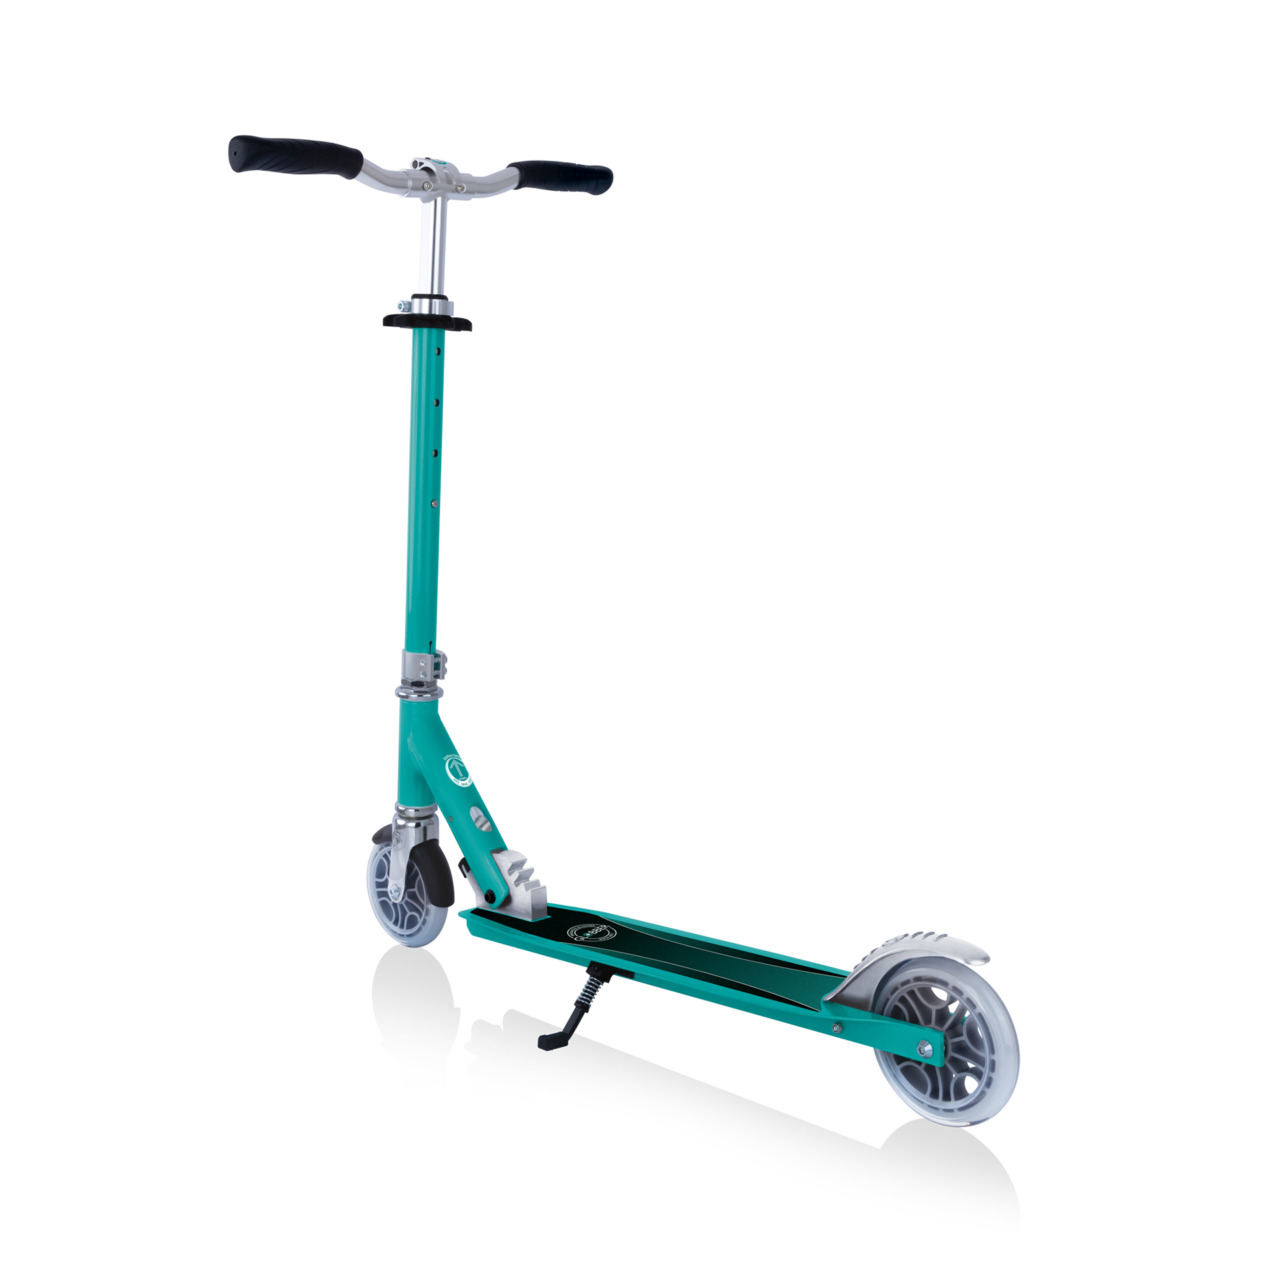 720 307 2 Wheel Fold Up Scooter